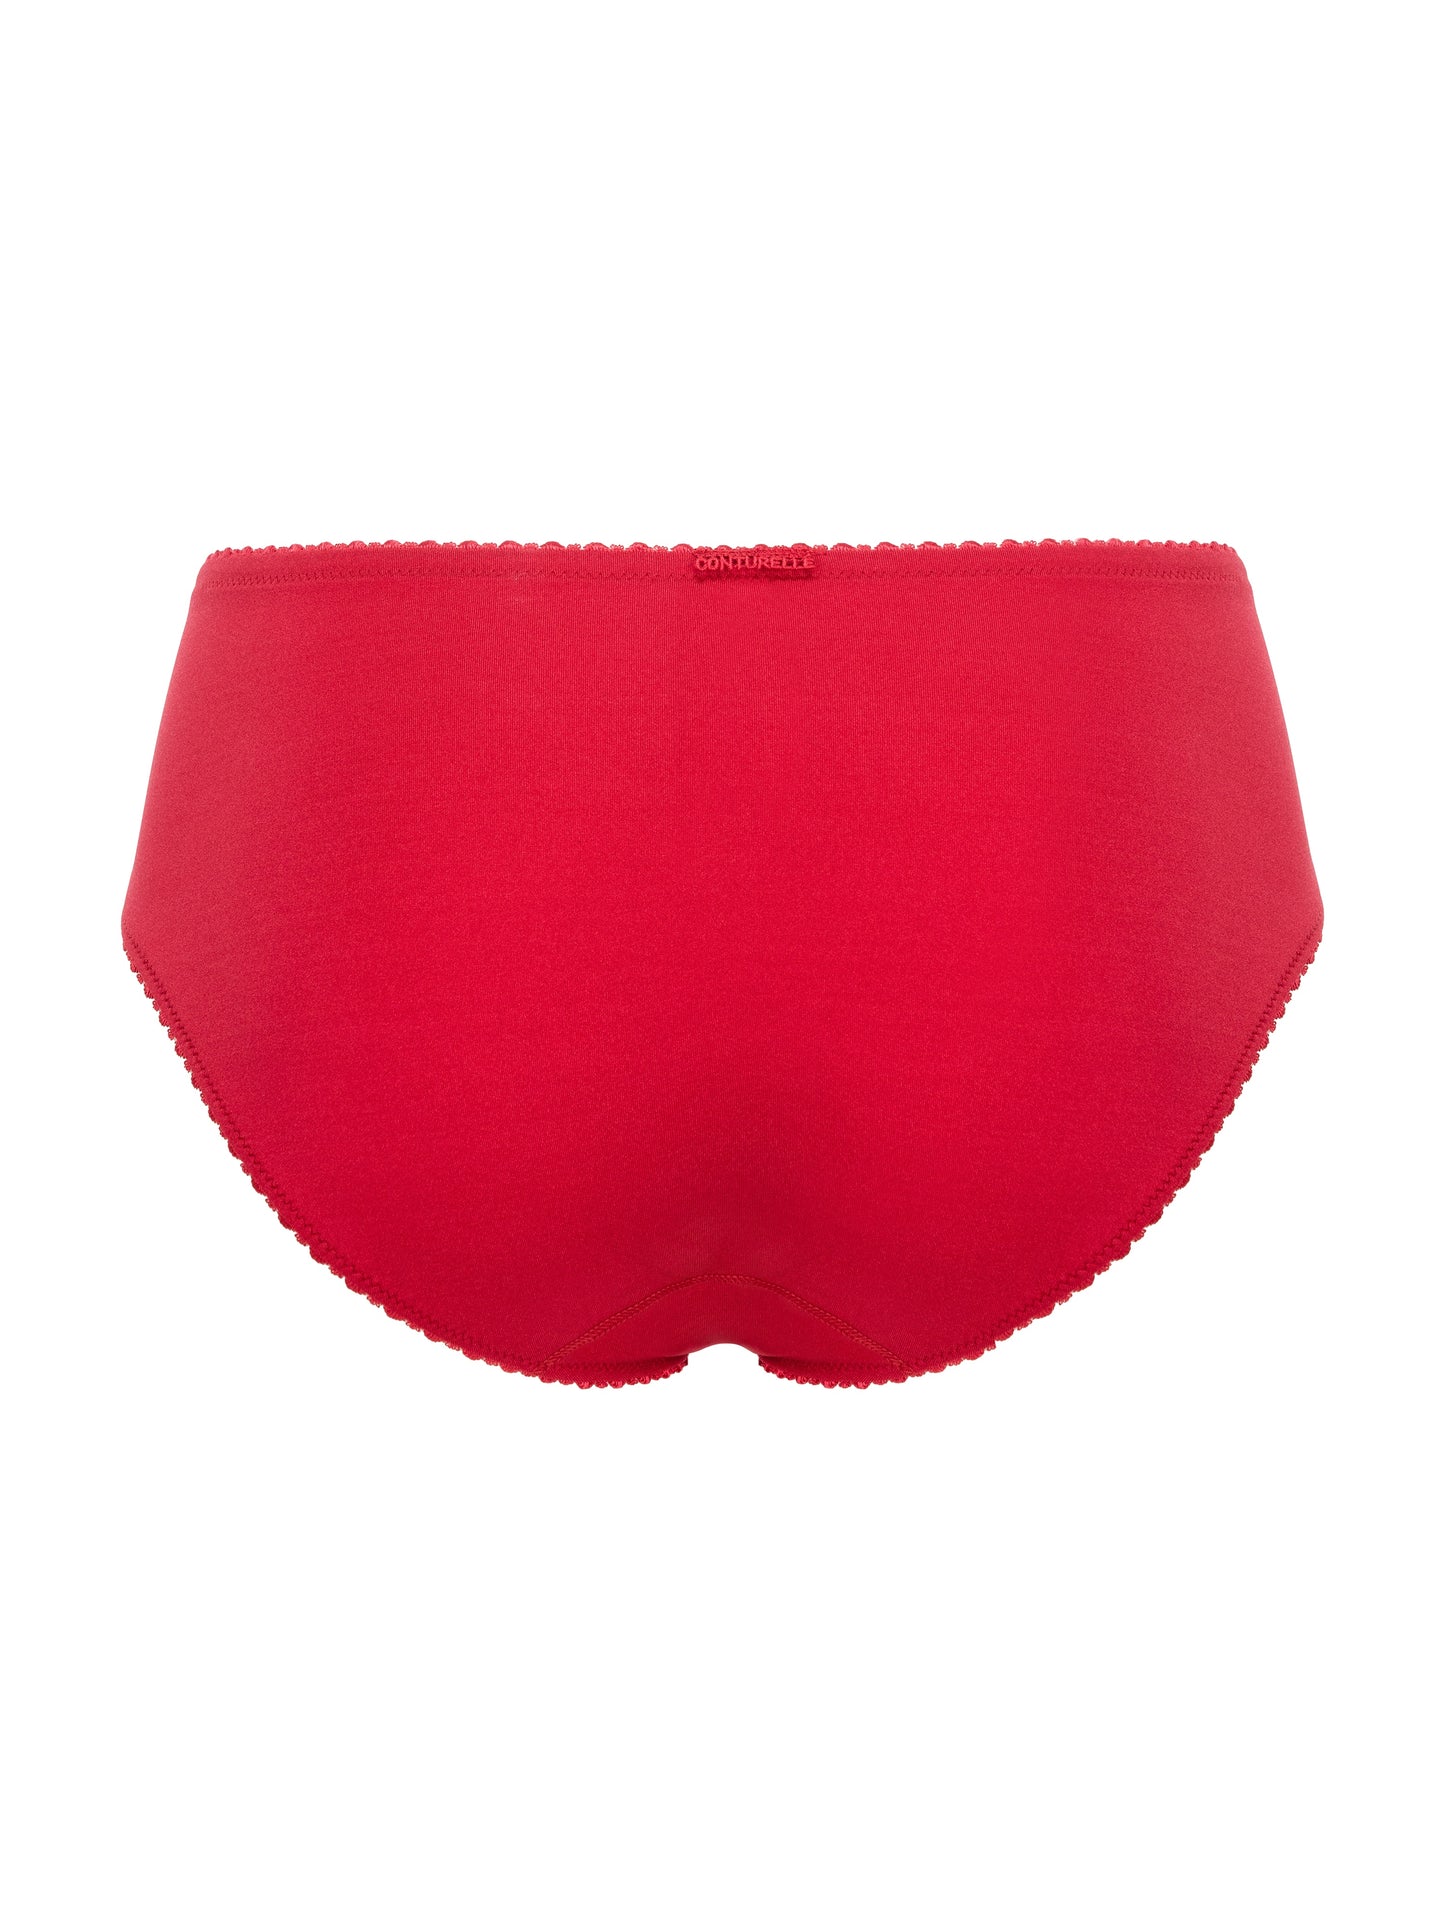 Provence Taillenslip (Tango Red)